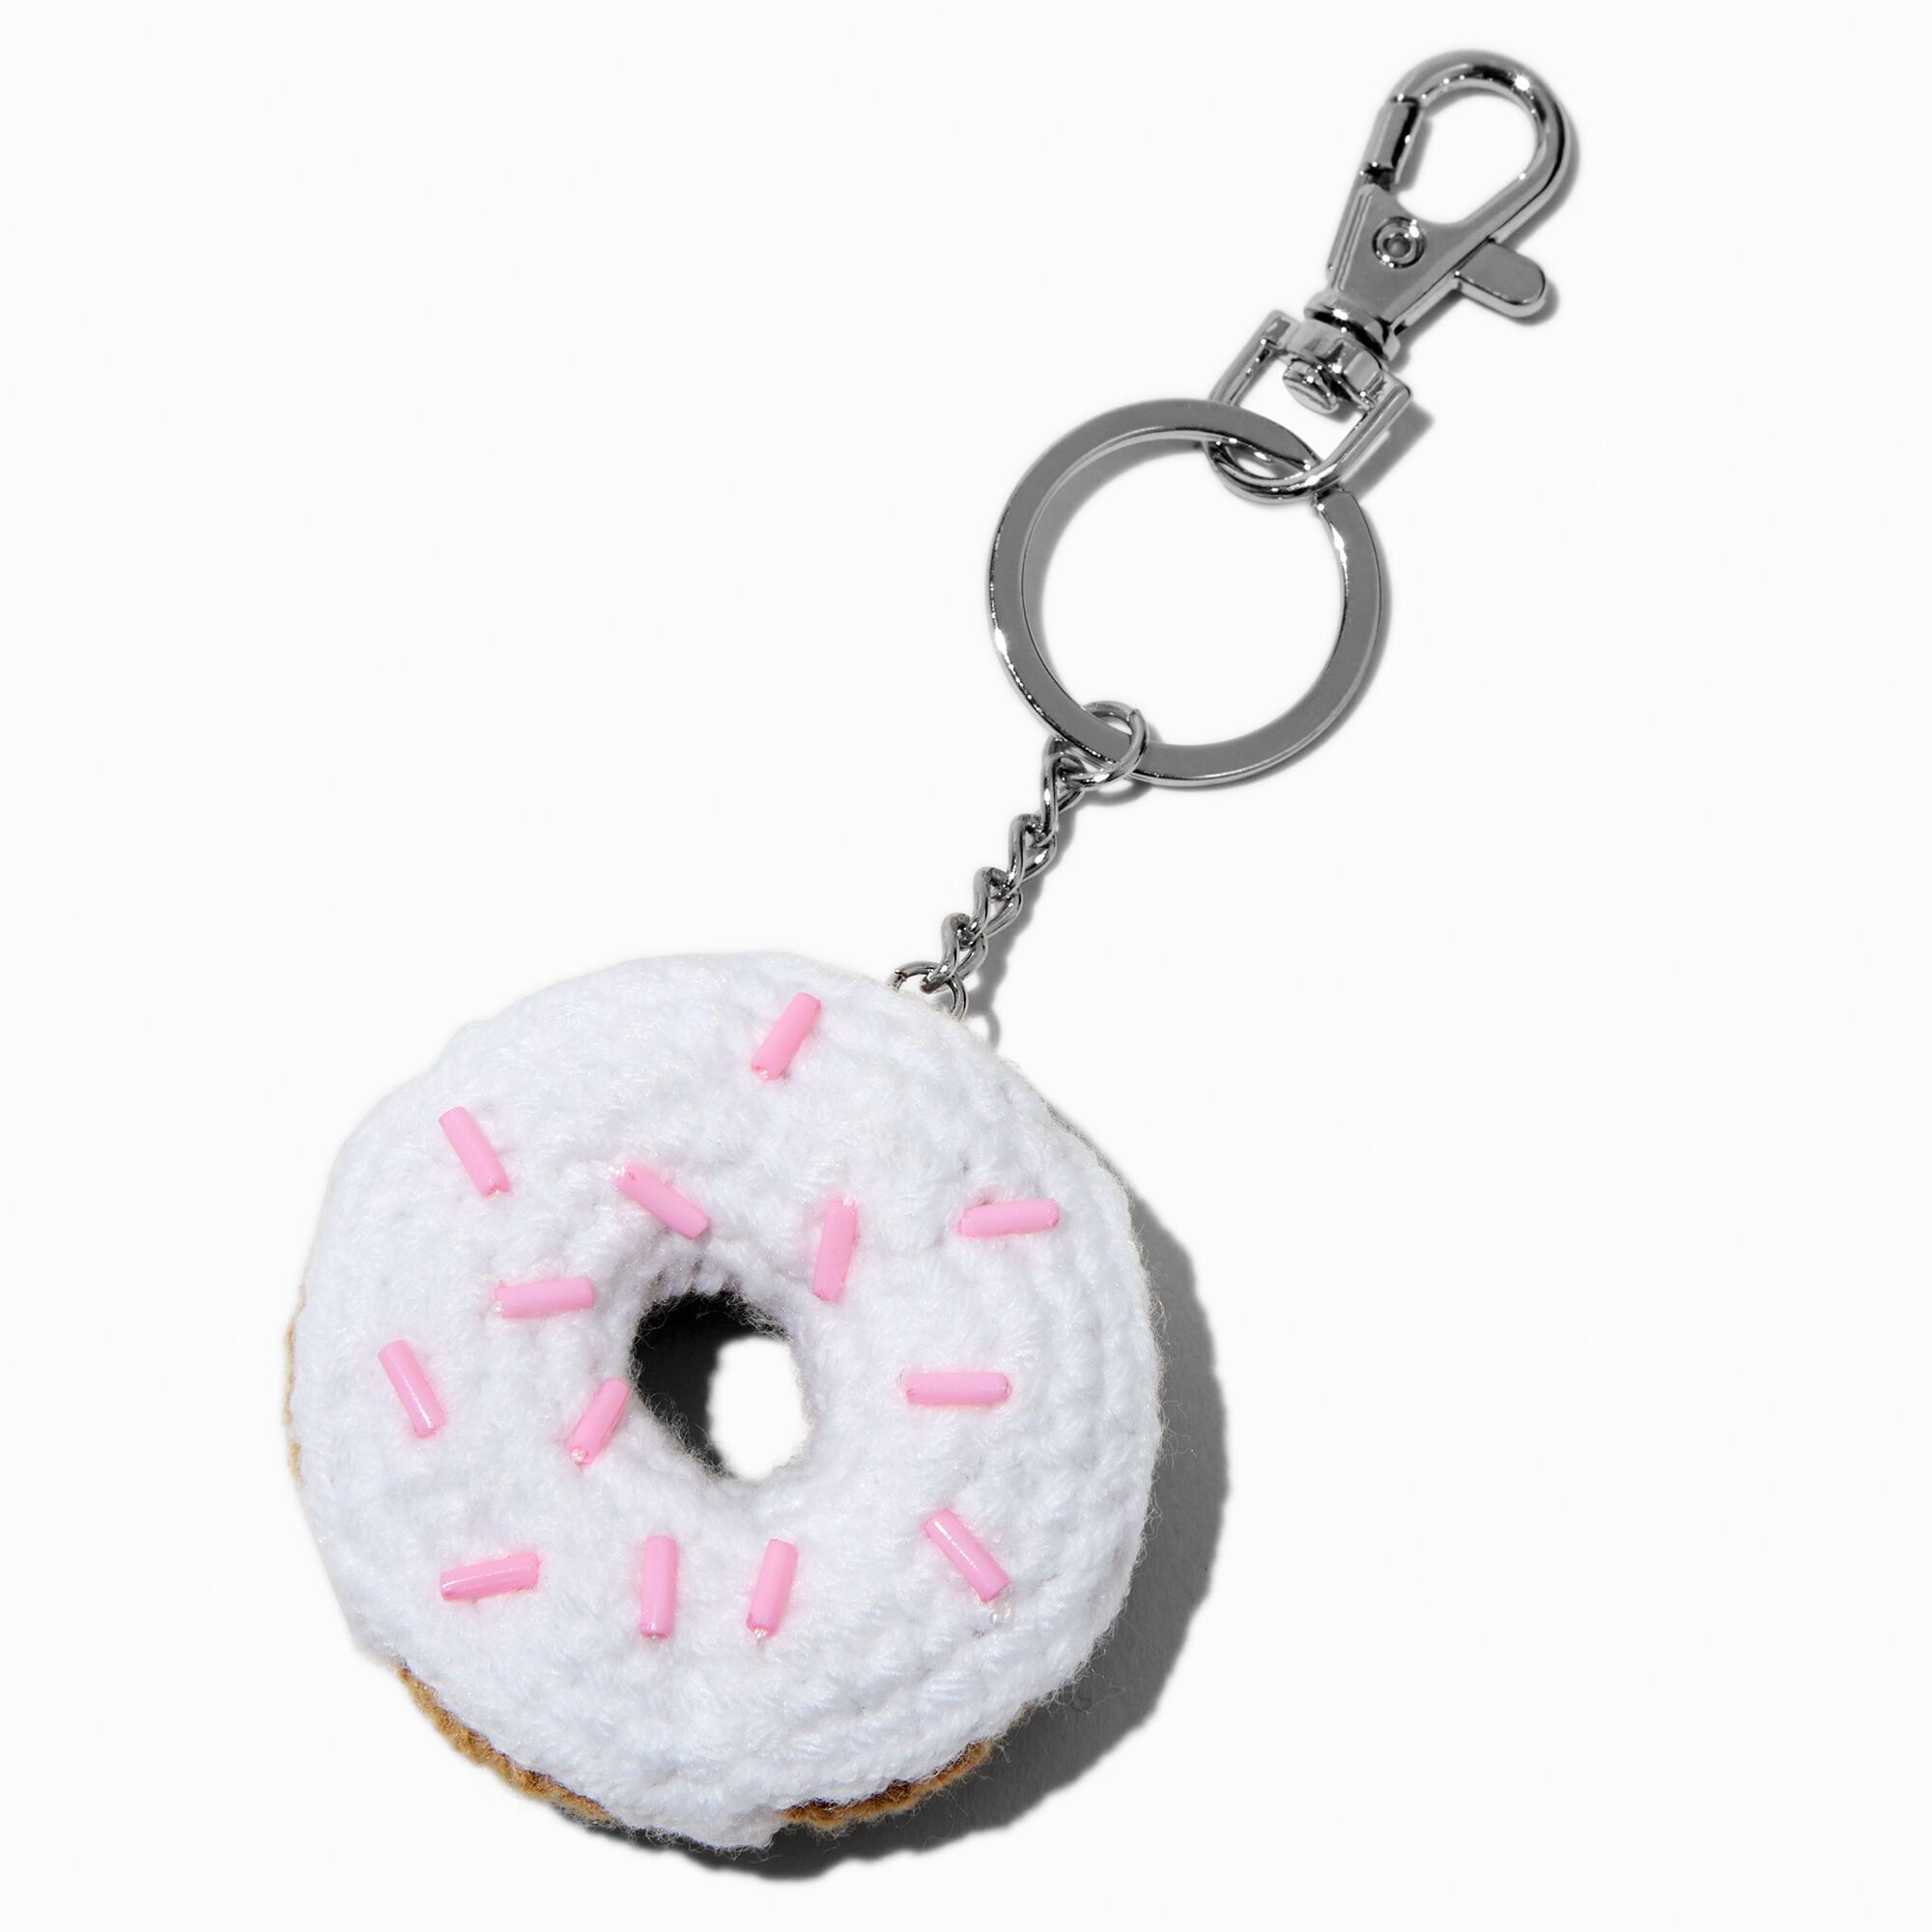 View Claires Sprinkle Donut Crocheted Keychain Pink information